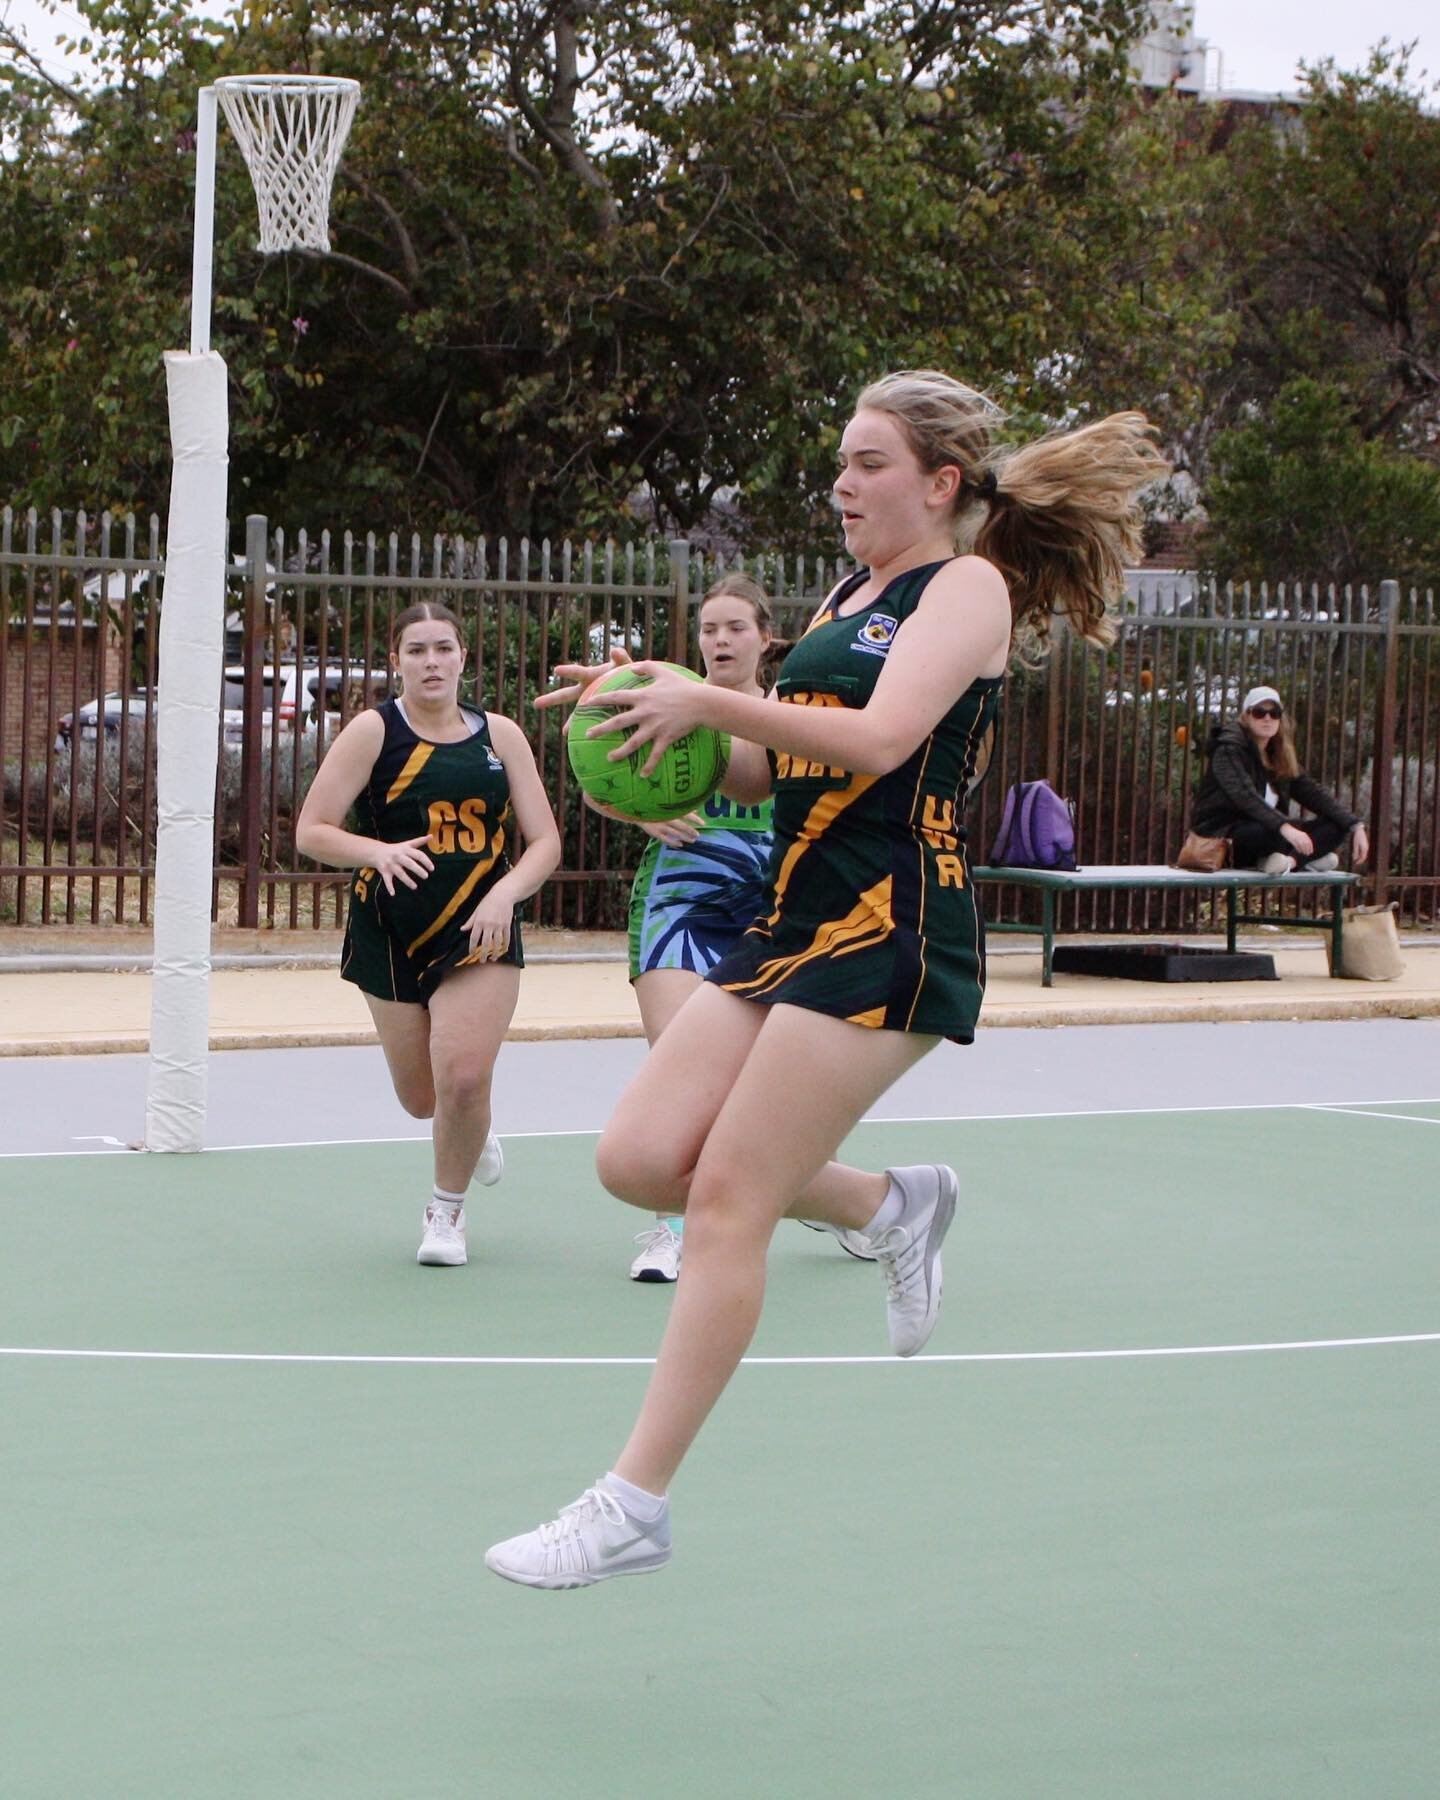 Well done to the teams who have progressed straight to the Grand Final and best of luck to the teams playing next week! 

📸 Teams of the Round: UWA 11 (Open) and UWA 3 (Y9-12)

Finals Round 1 Club Results 
Open: 3 wins + 4 losses
Y9-12: 1 win + 2 lo